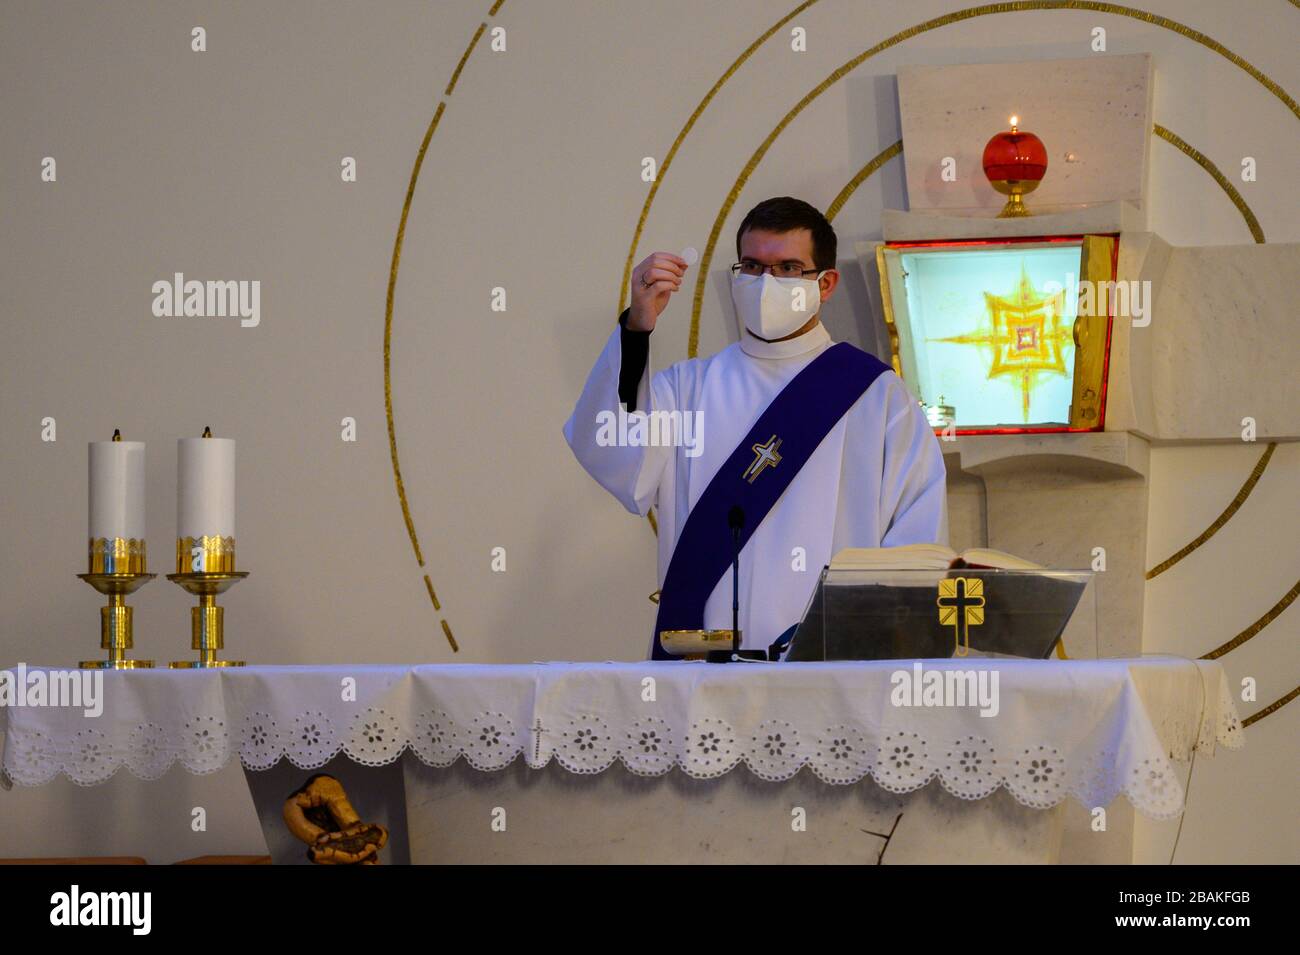 Bratislava, Slovakia. 2019/3/20. A deacon holding the Host before distributing the Eucharist to the faithful in a church during the COVID-19 pandemic. Stock Photo